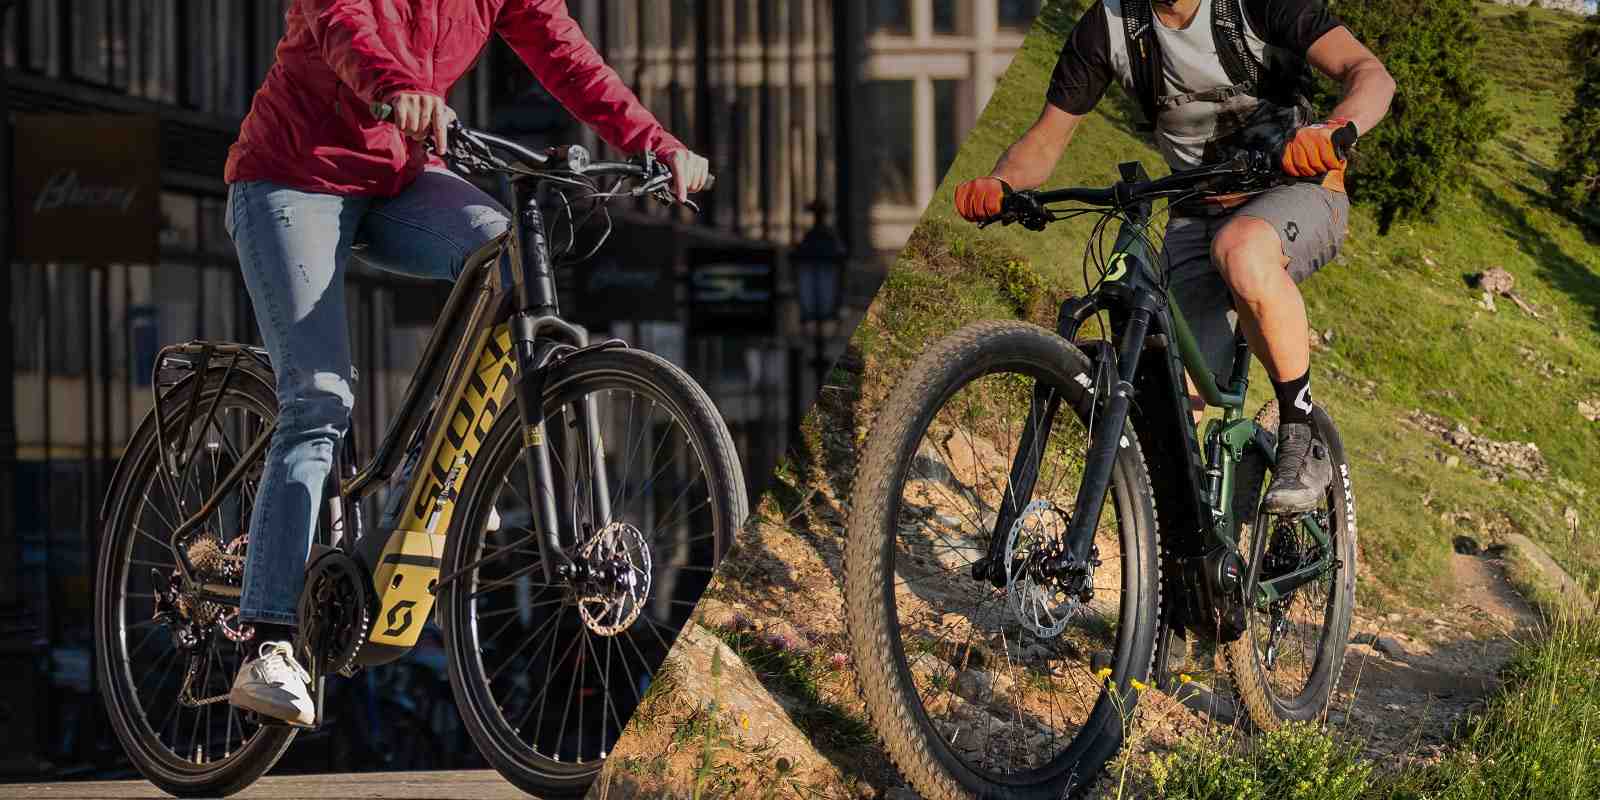 Can I drive an electric bike without a license?